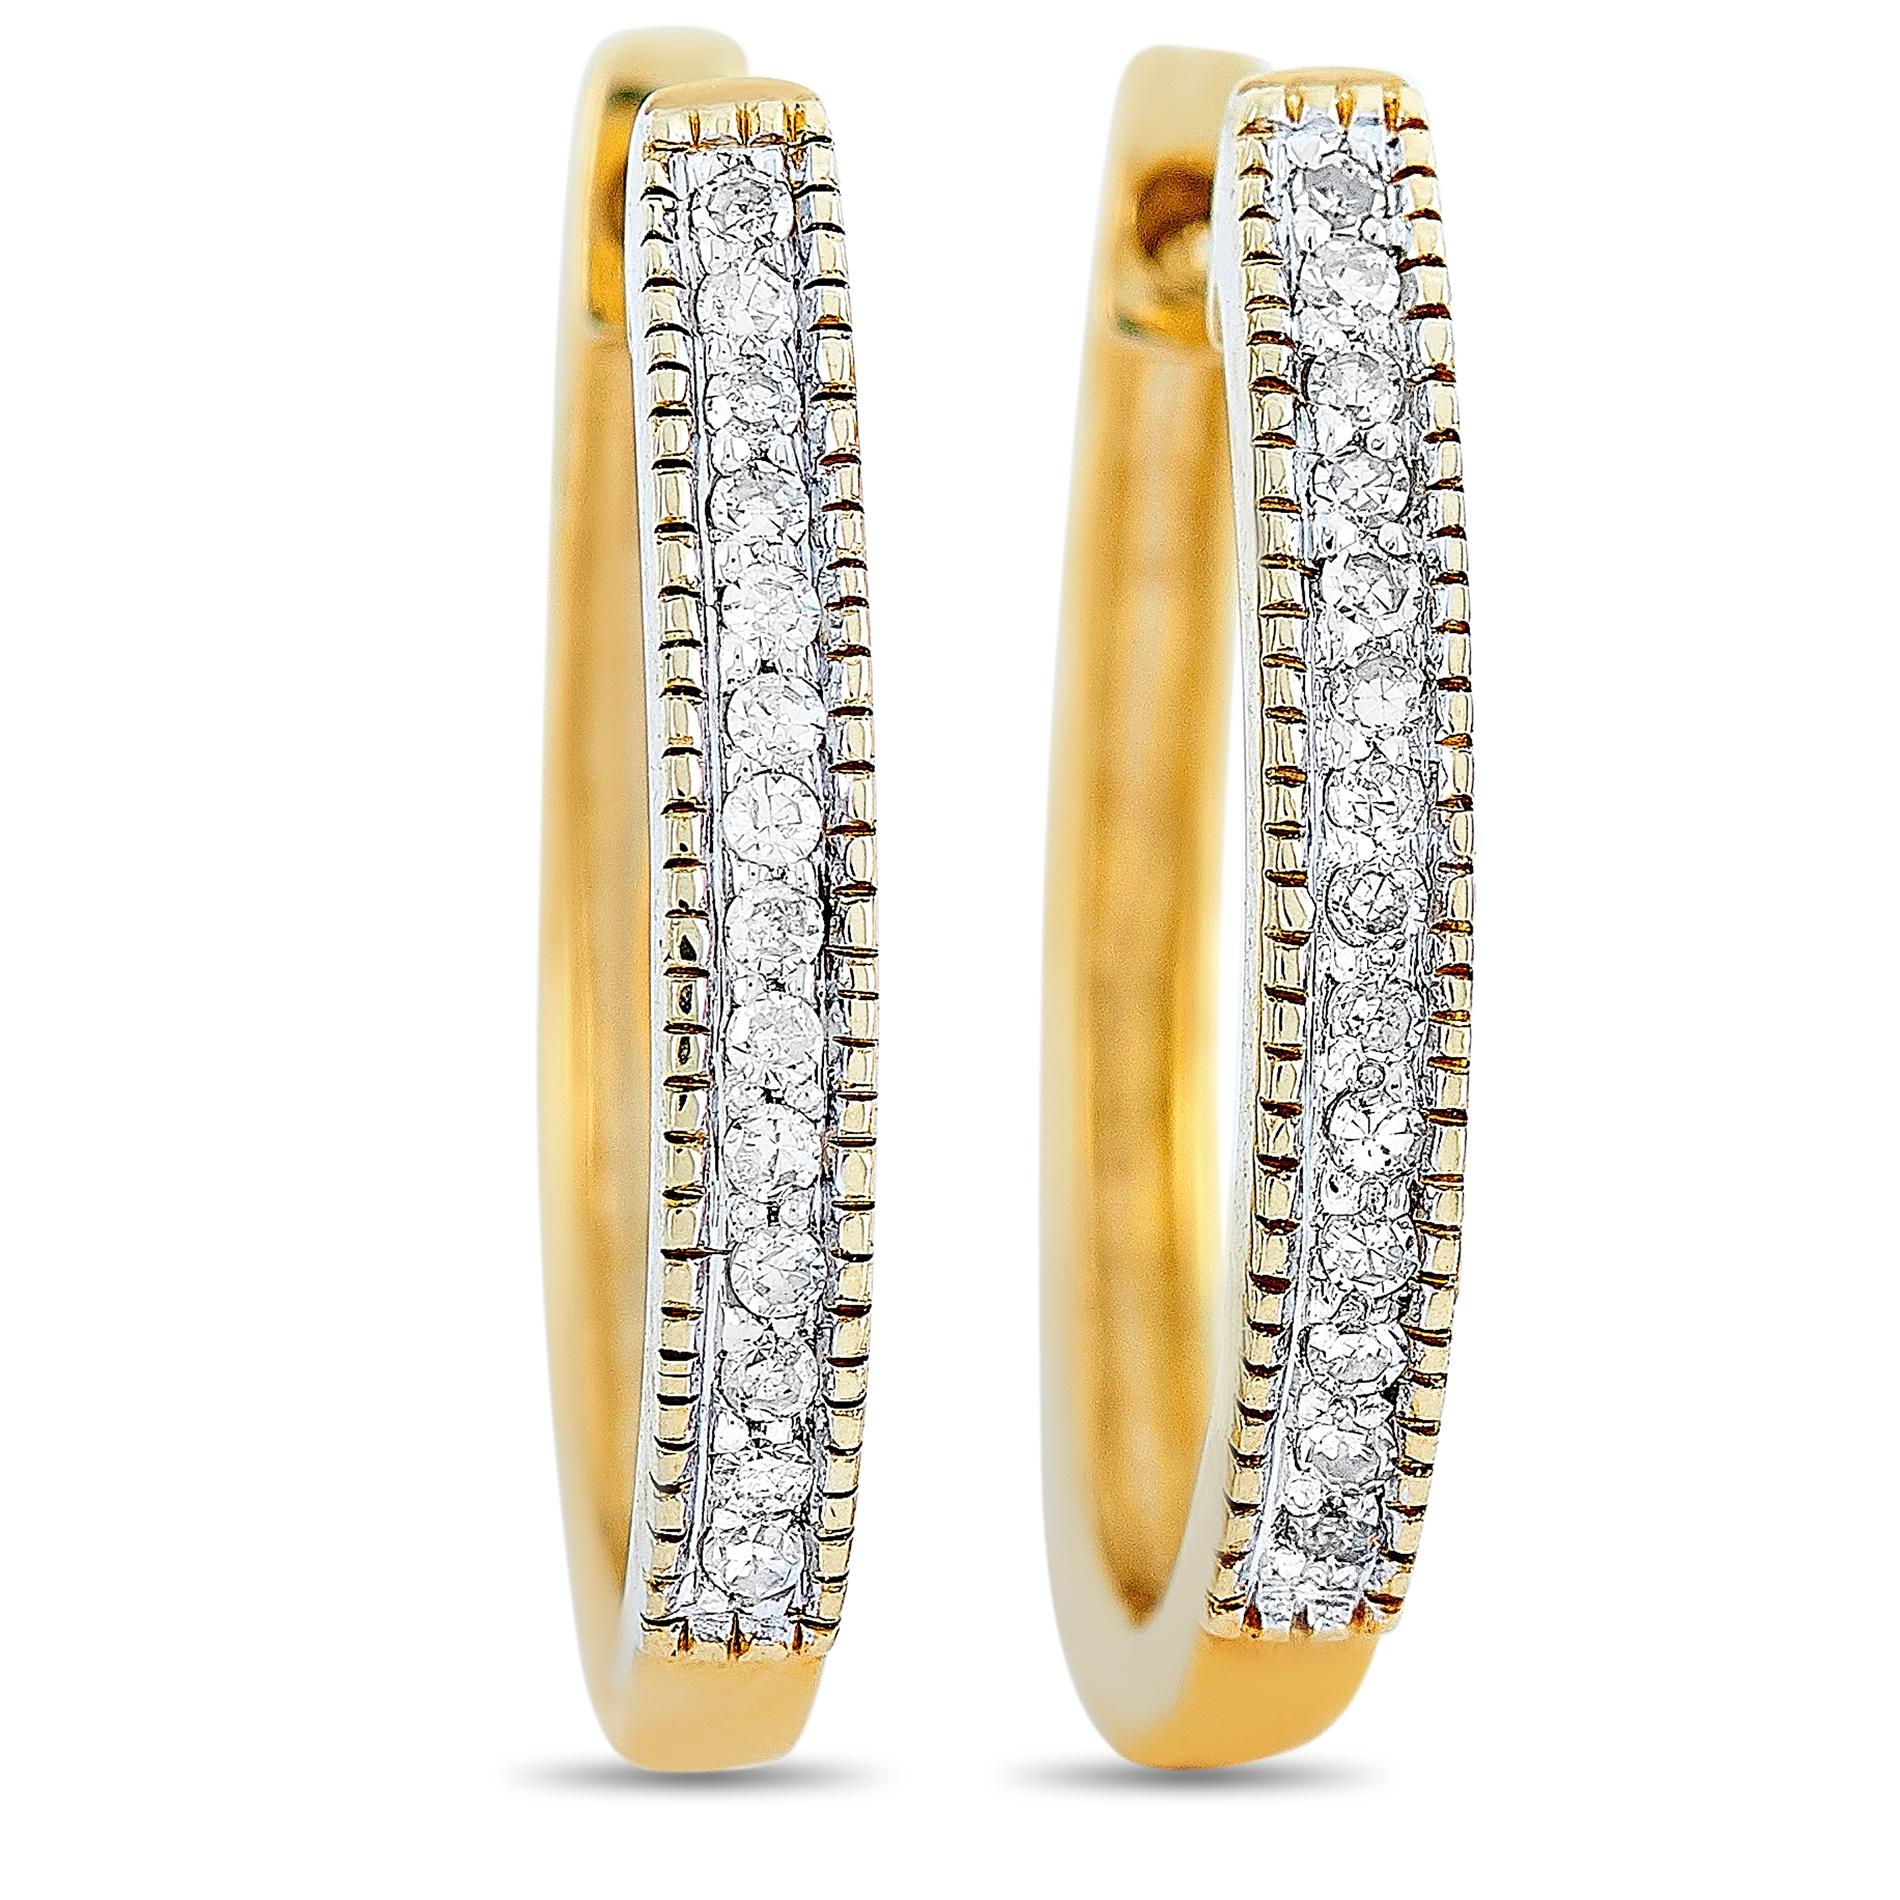 These LB Exclusive earrings are made of 14K yellow gold and each of the two weighs 1.15 grams. They measure 0.60” in length and 0.08” in width. The pair is embellished with diamonds that total 0.10 carats.
 
 The earrings are offered in brand new